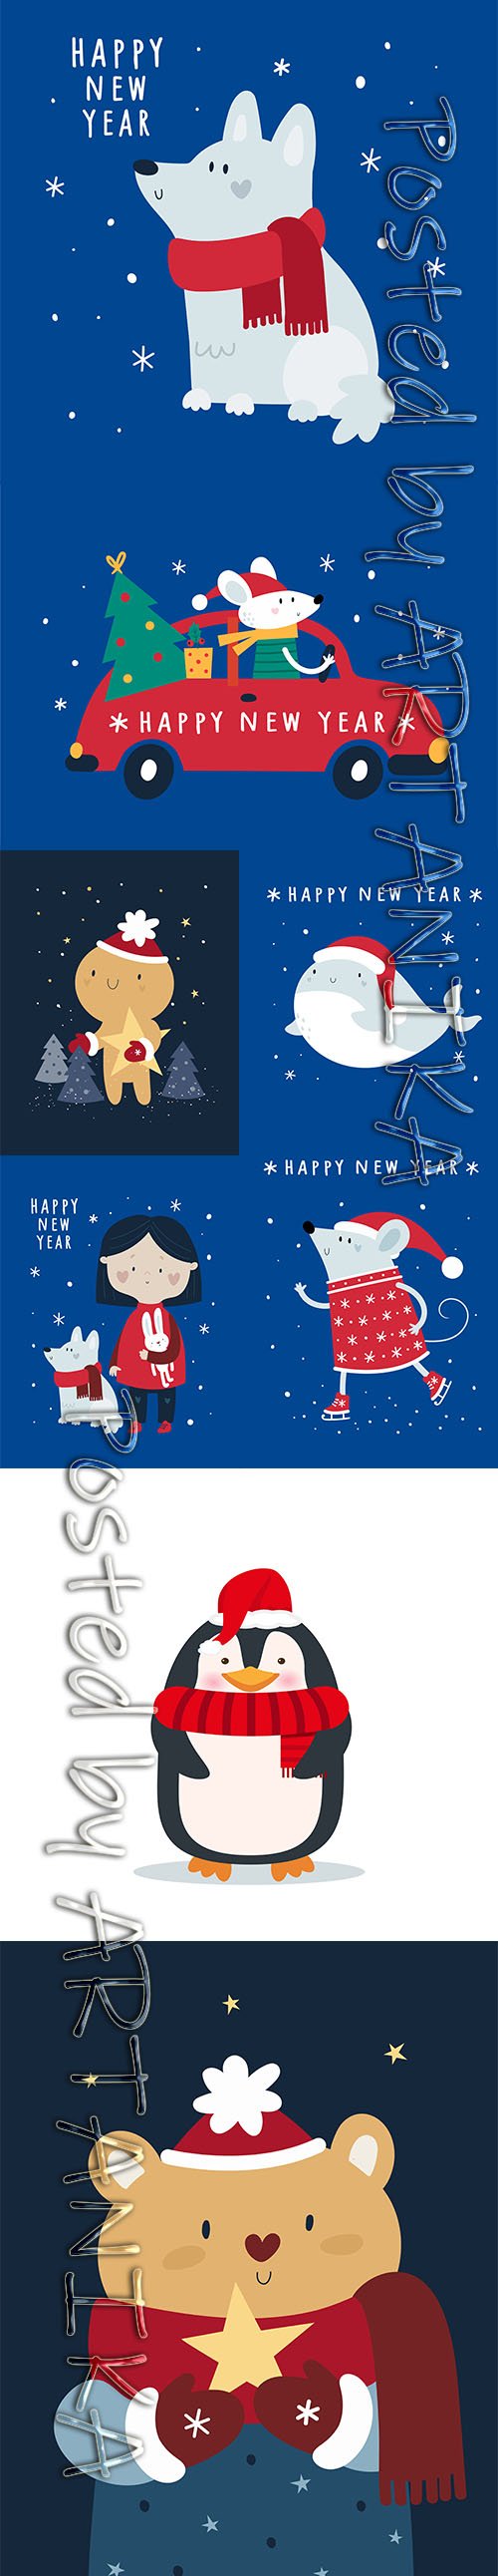 New Year 2020 and Christmas Festive Holidays Card Vector Pack